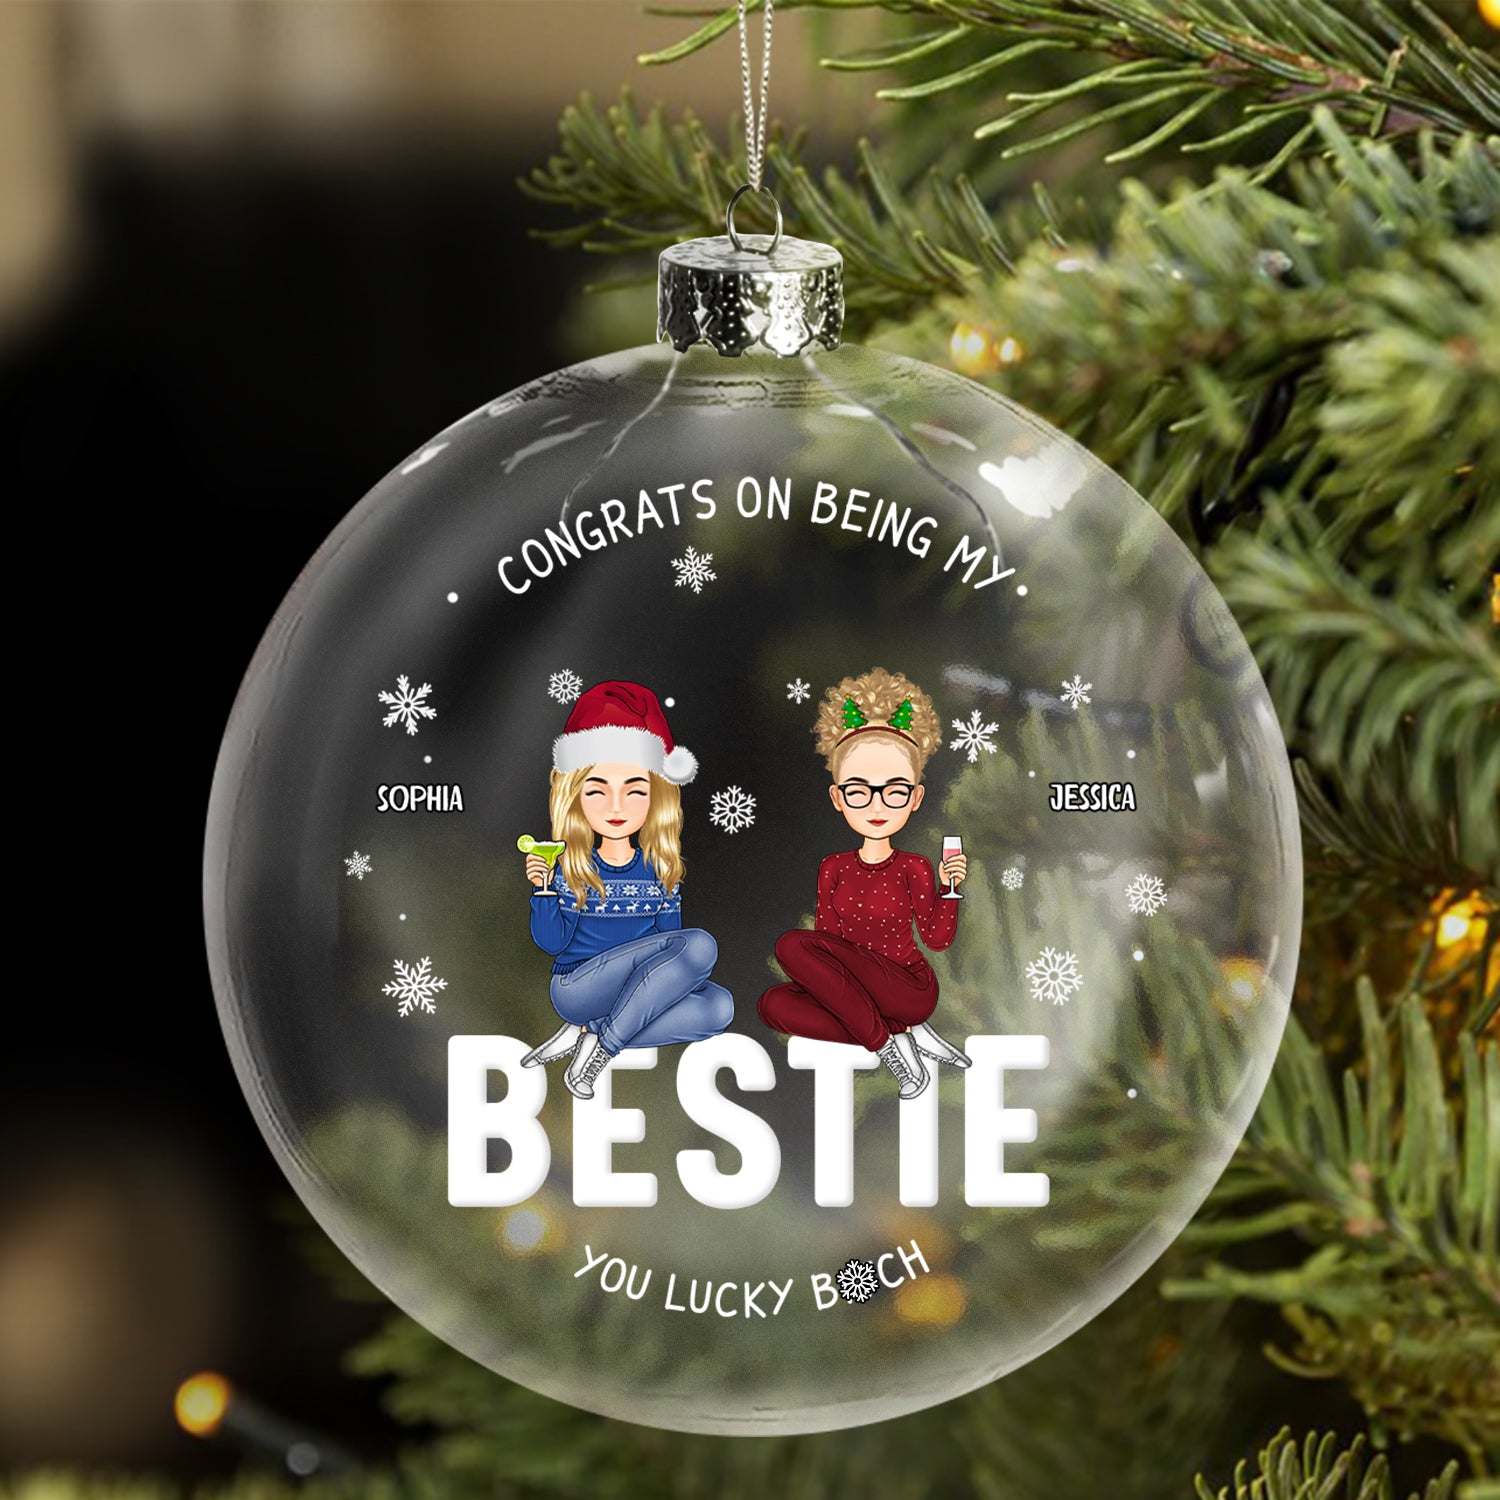 Congrats On Being My Bestie - Christmas Gift For Friends, Sisters, Sibling - Personalized Clear Flat Ball Ornament